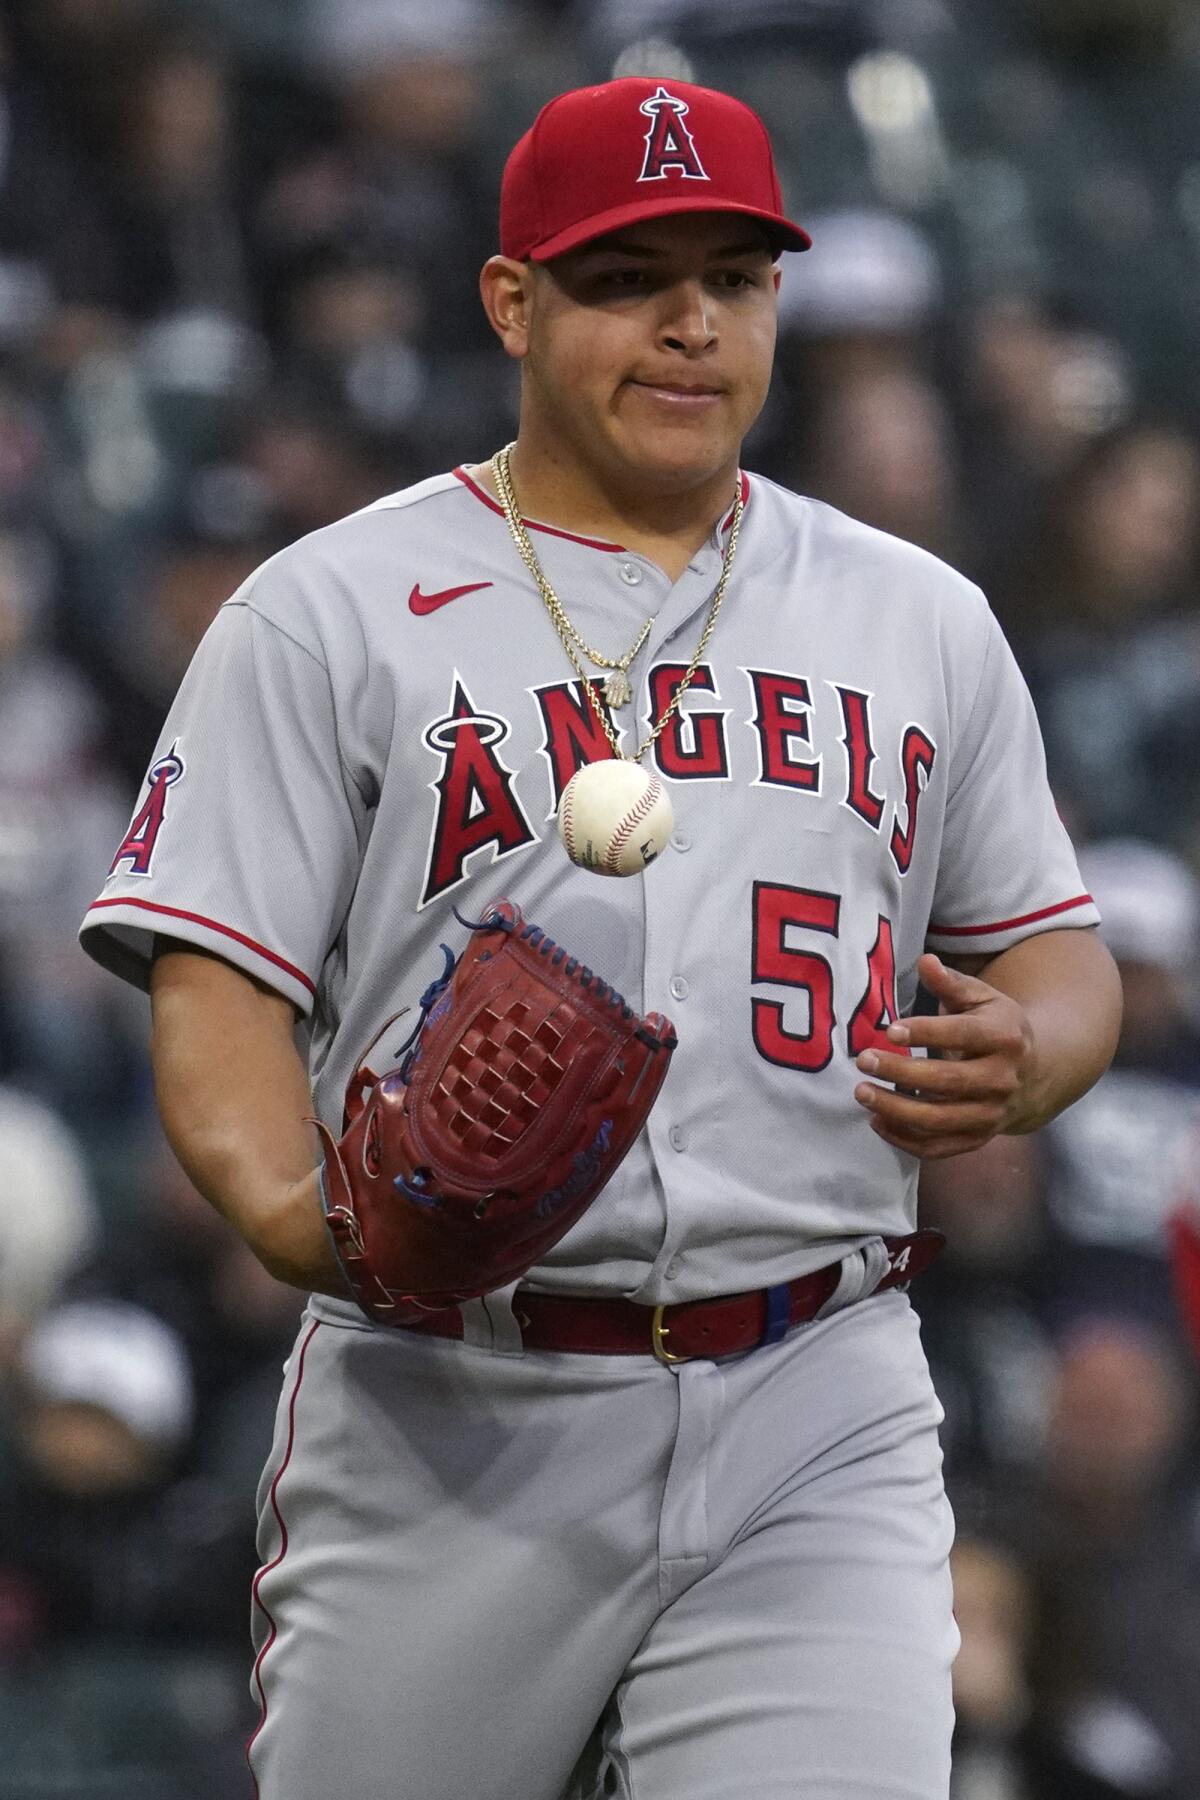 Angels starting pitcher Jose Suarez tosses the ball to himself.